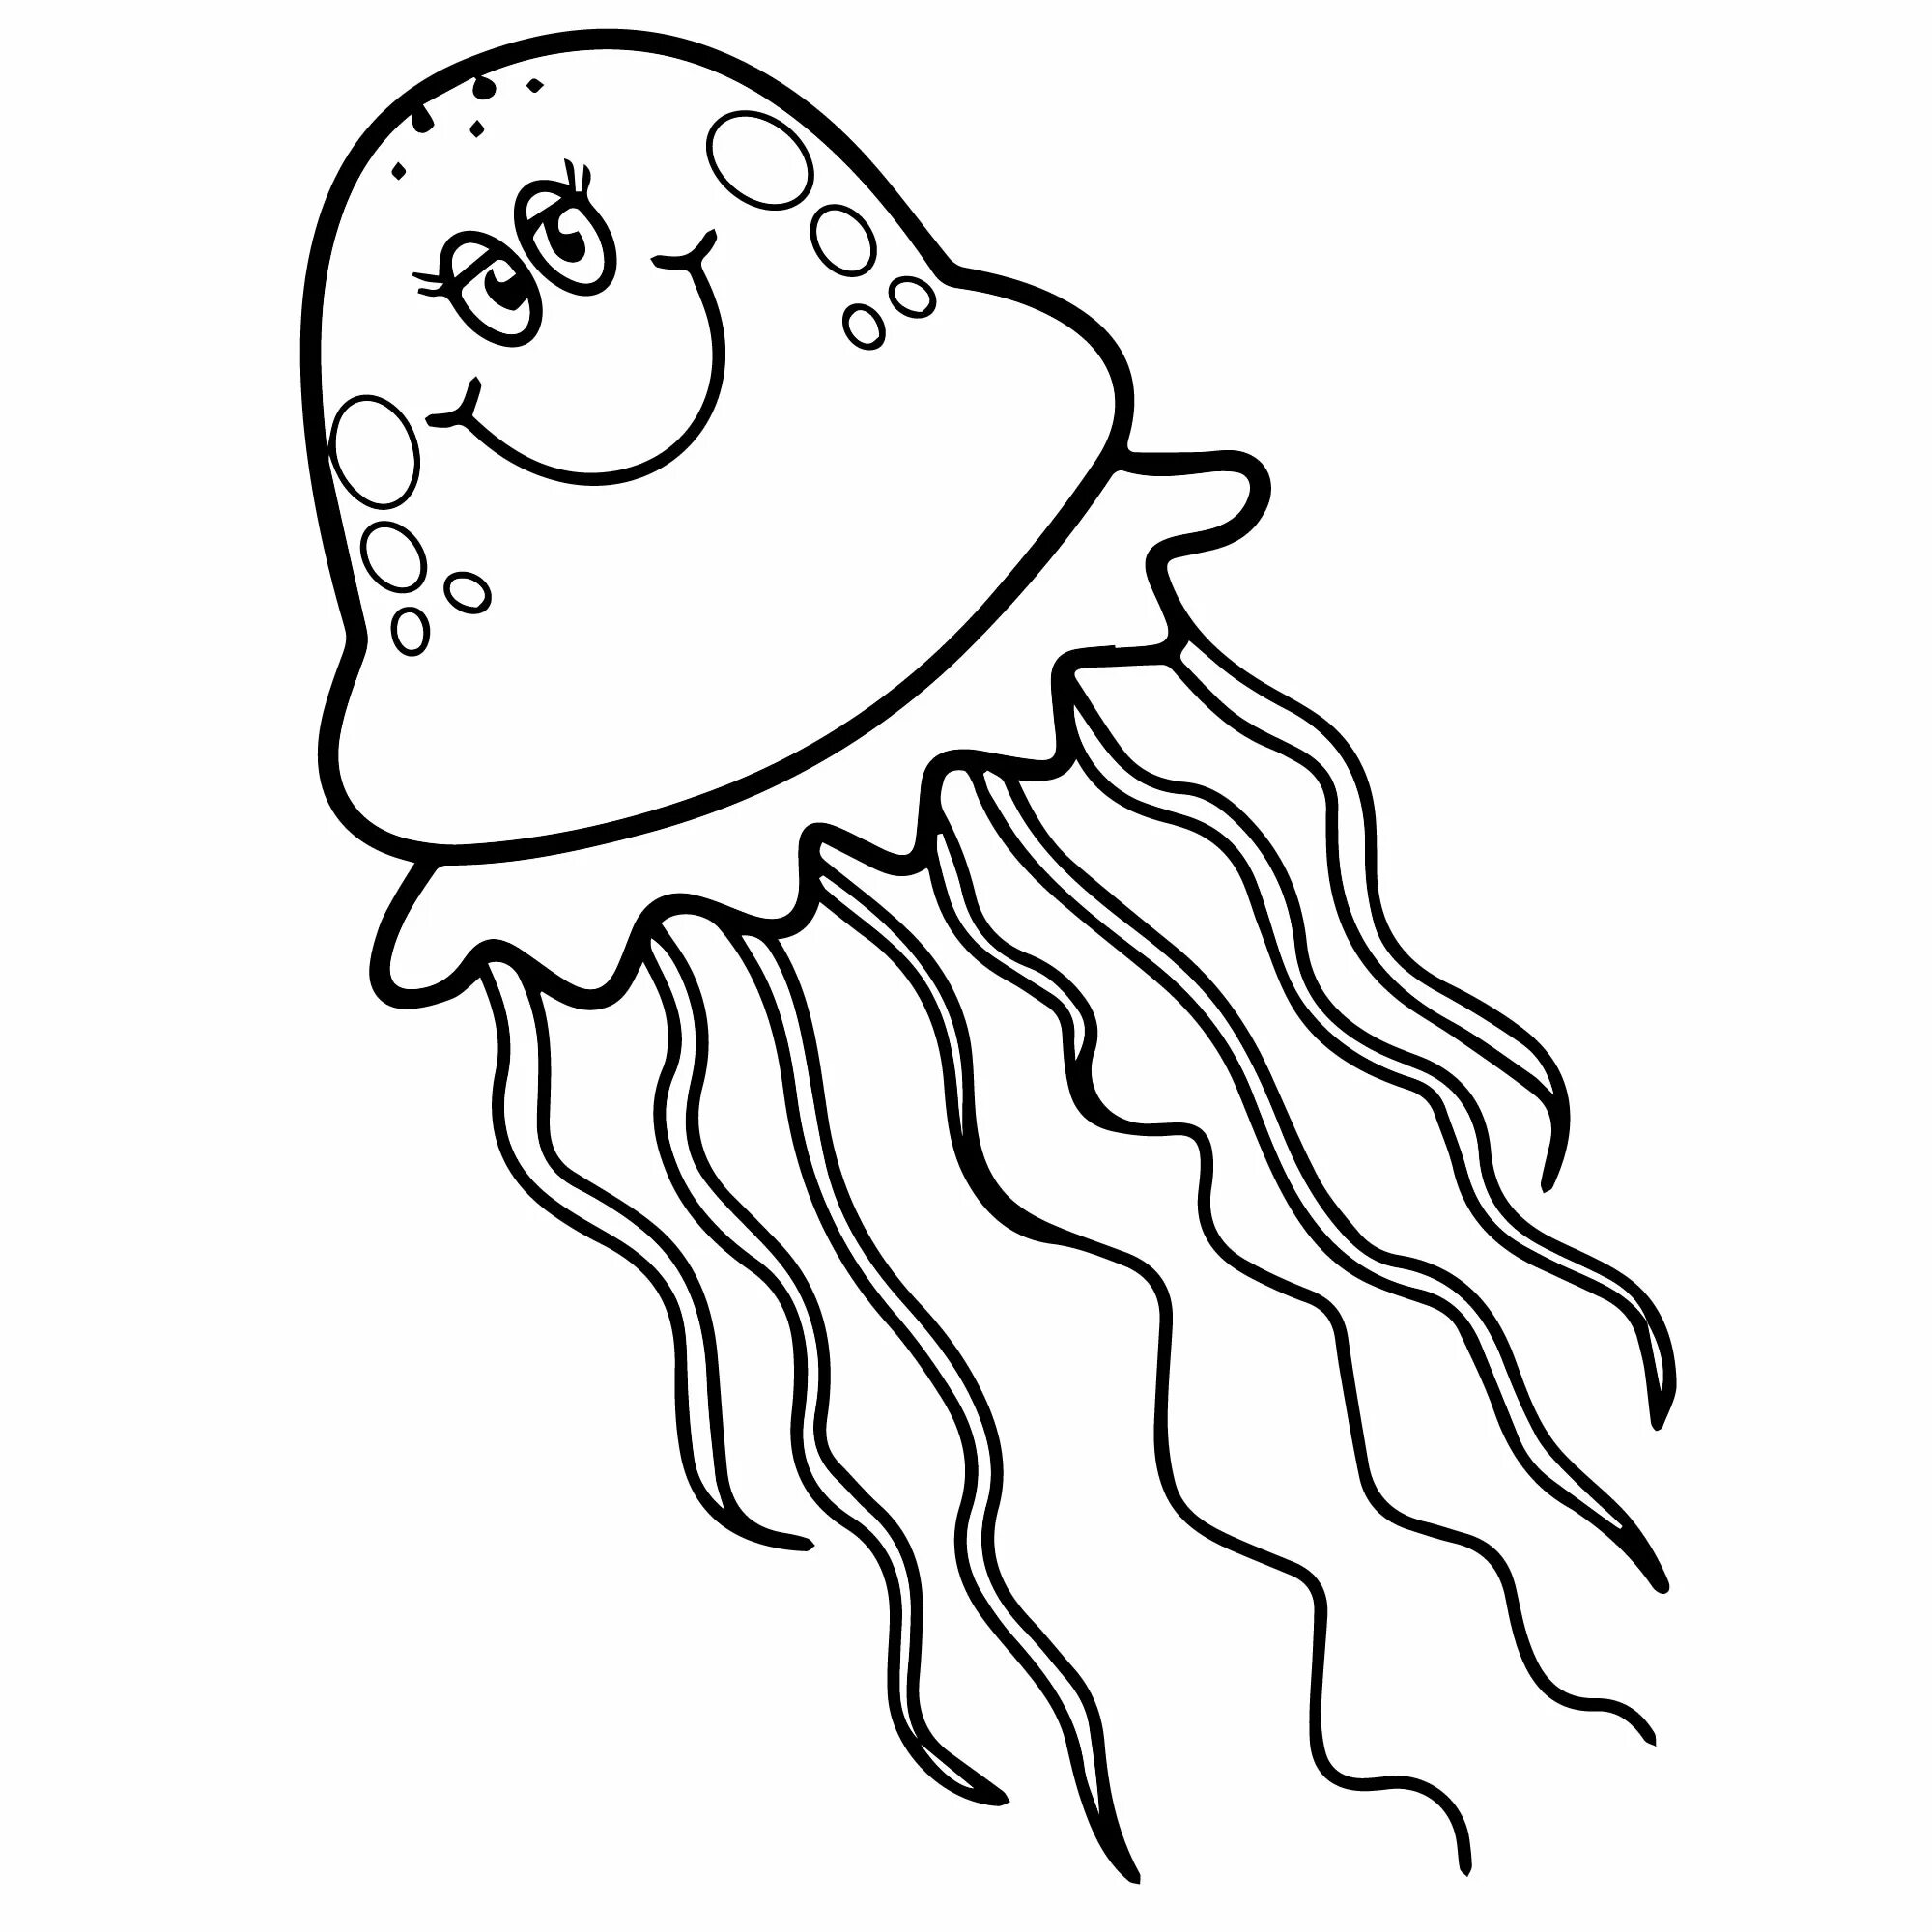 Exciting jellyfish coloring book for kids